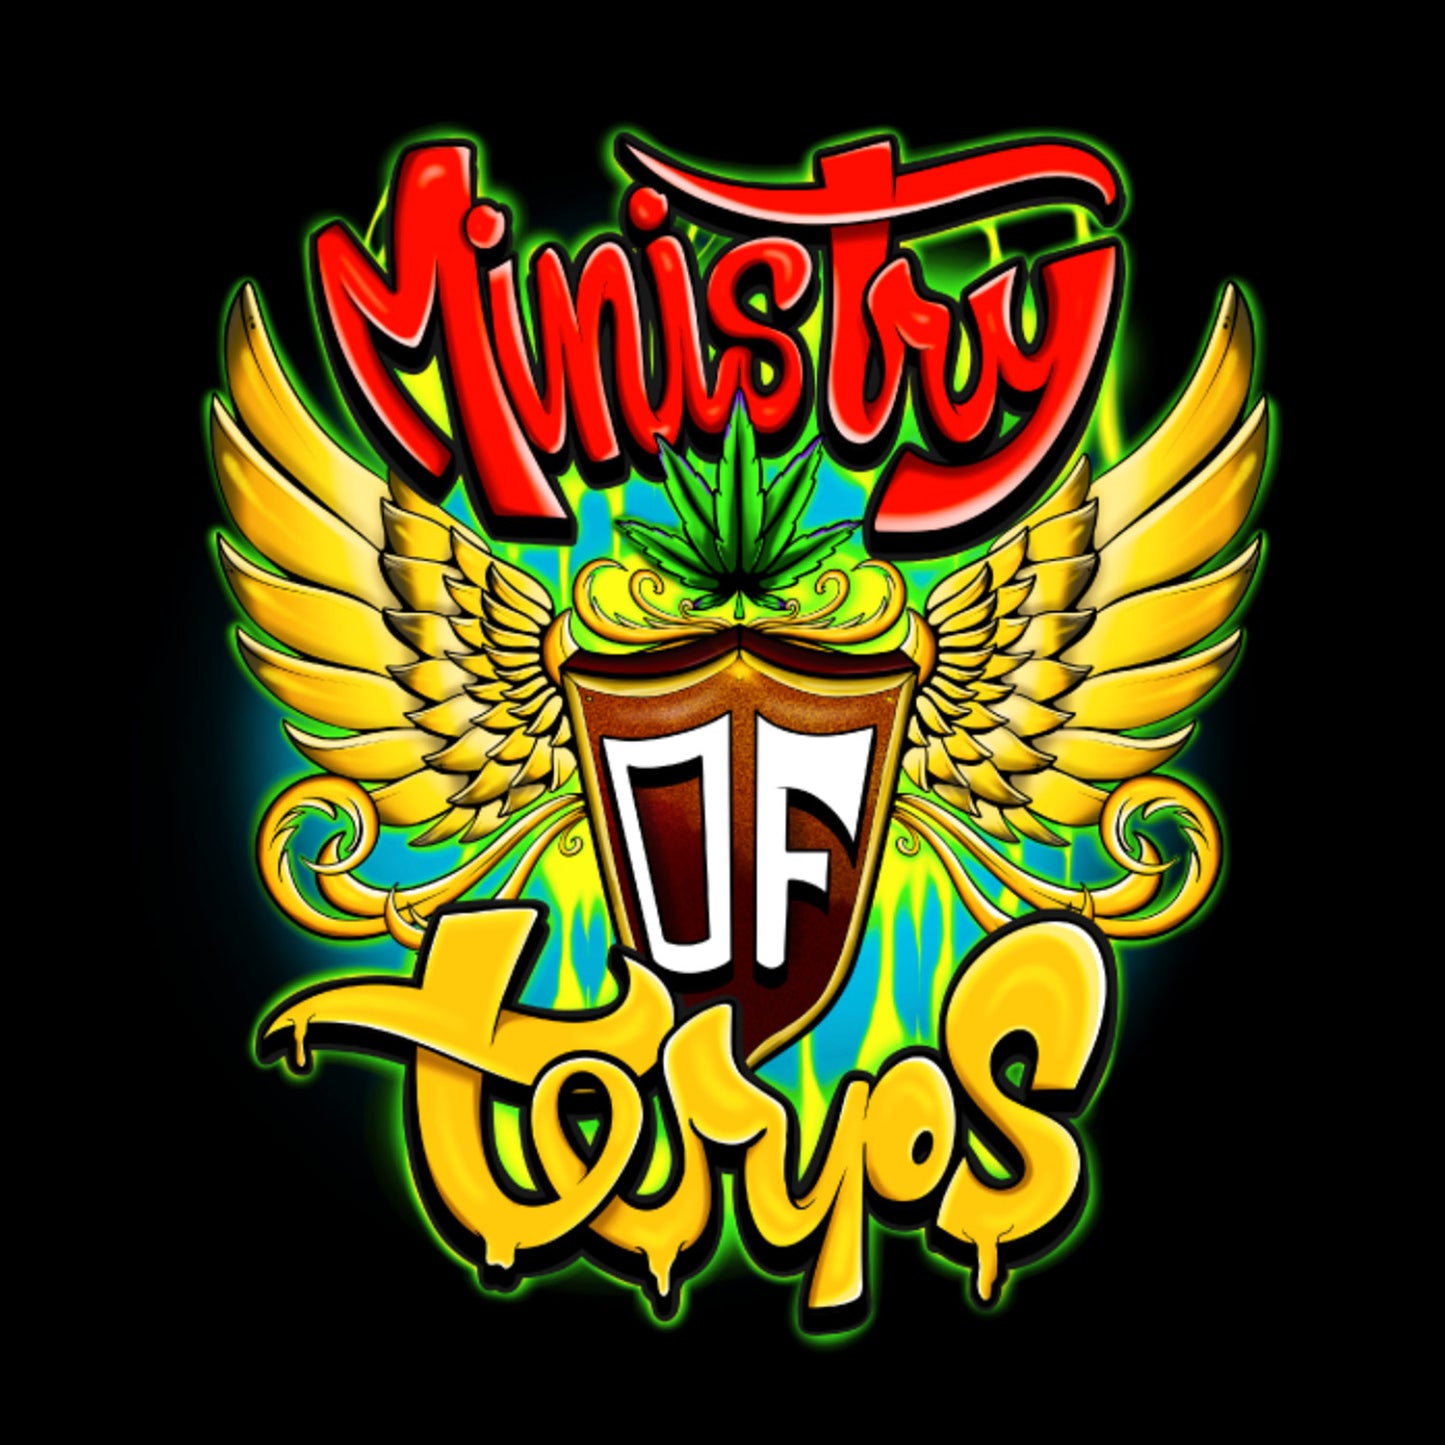 Ministry of Terps Teneriffa